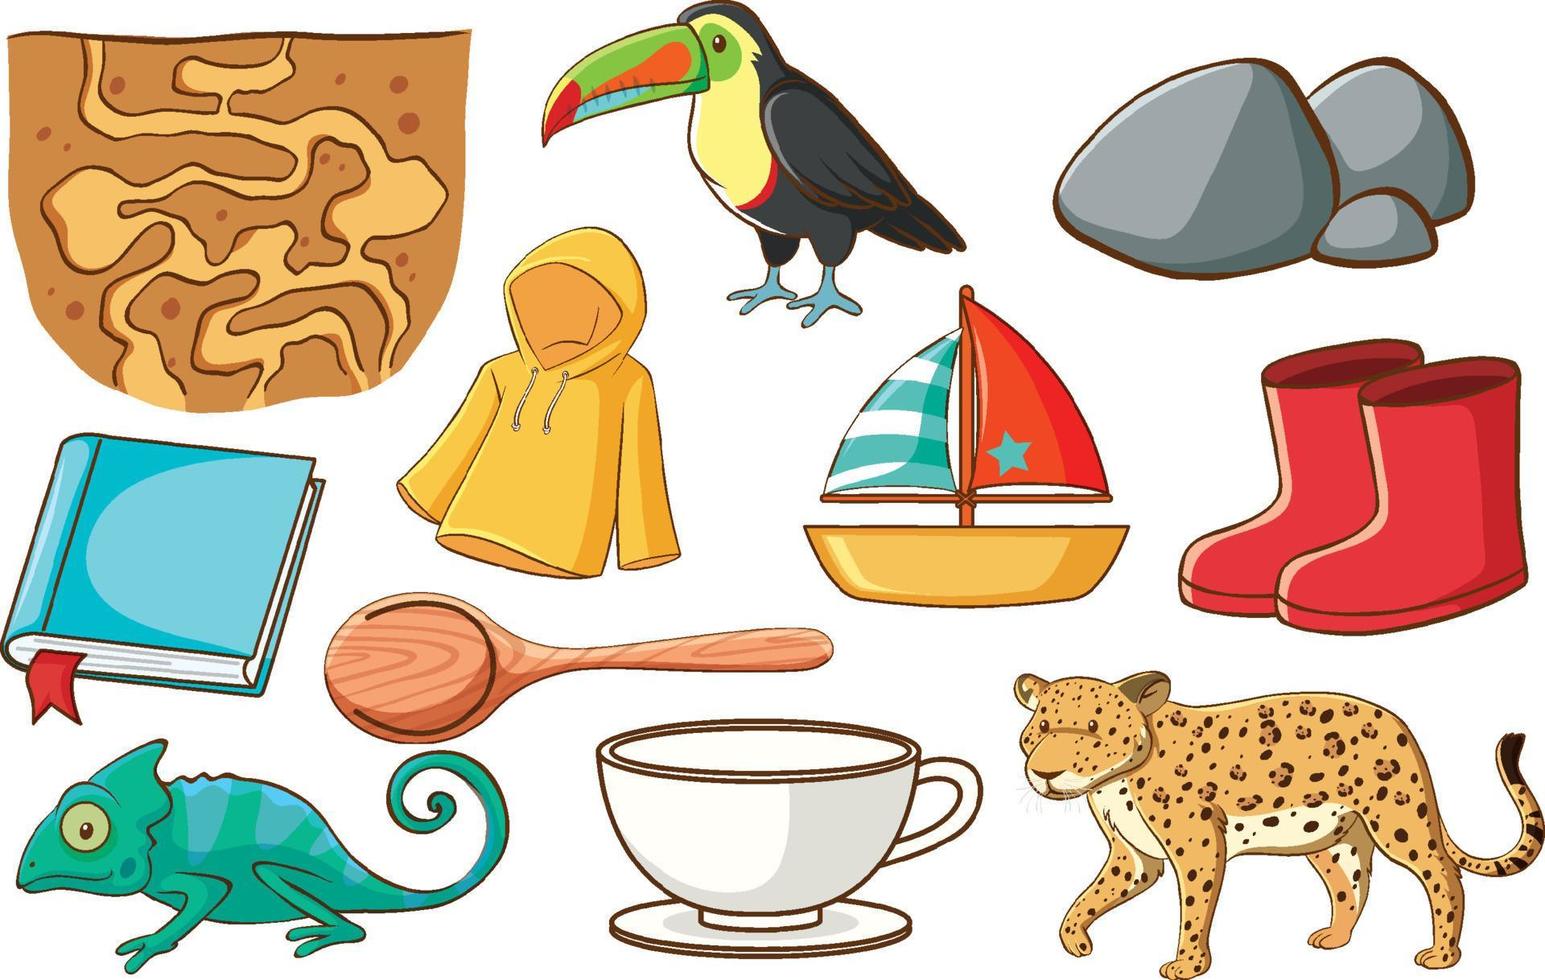 Set of various animals and objects vector